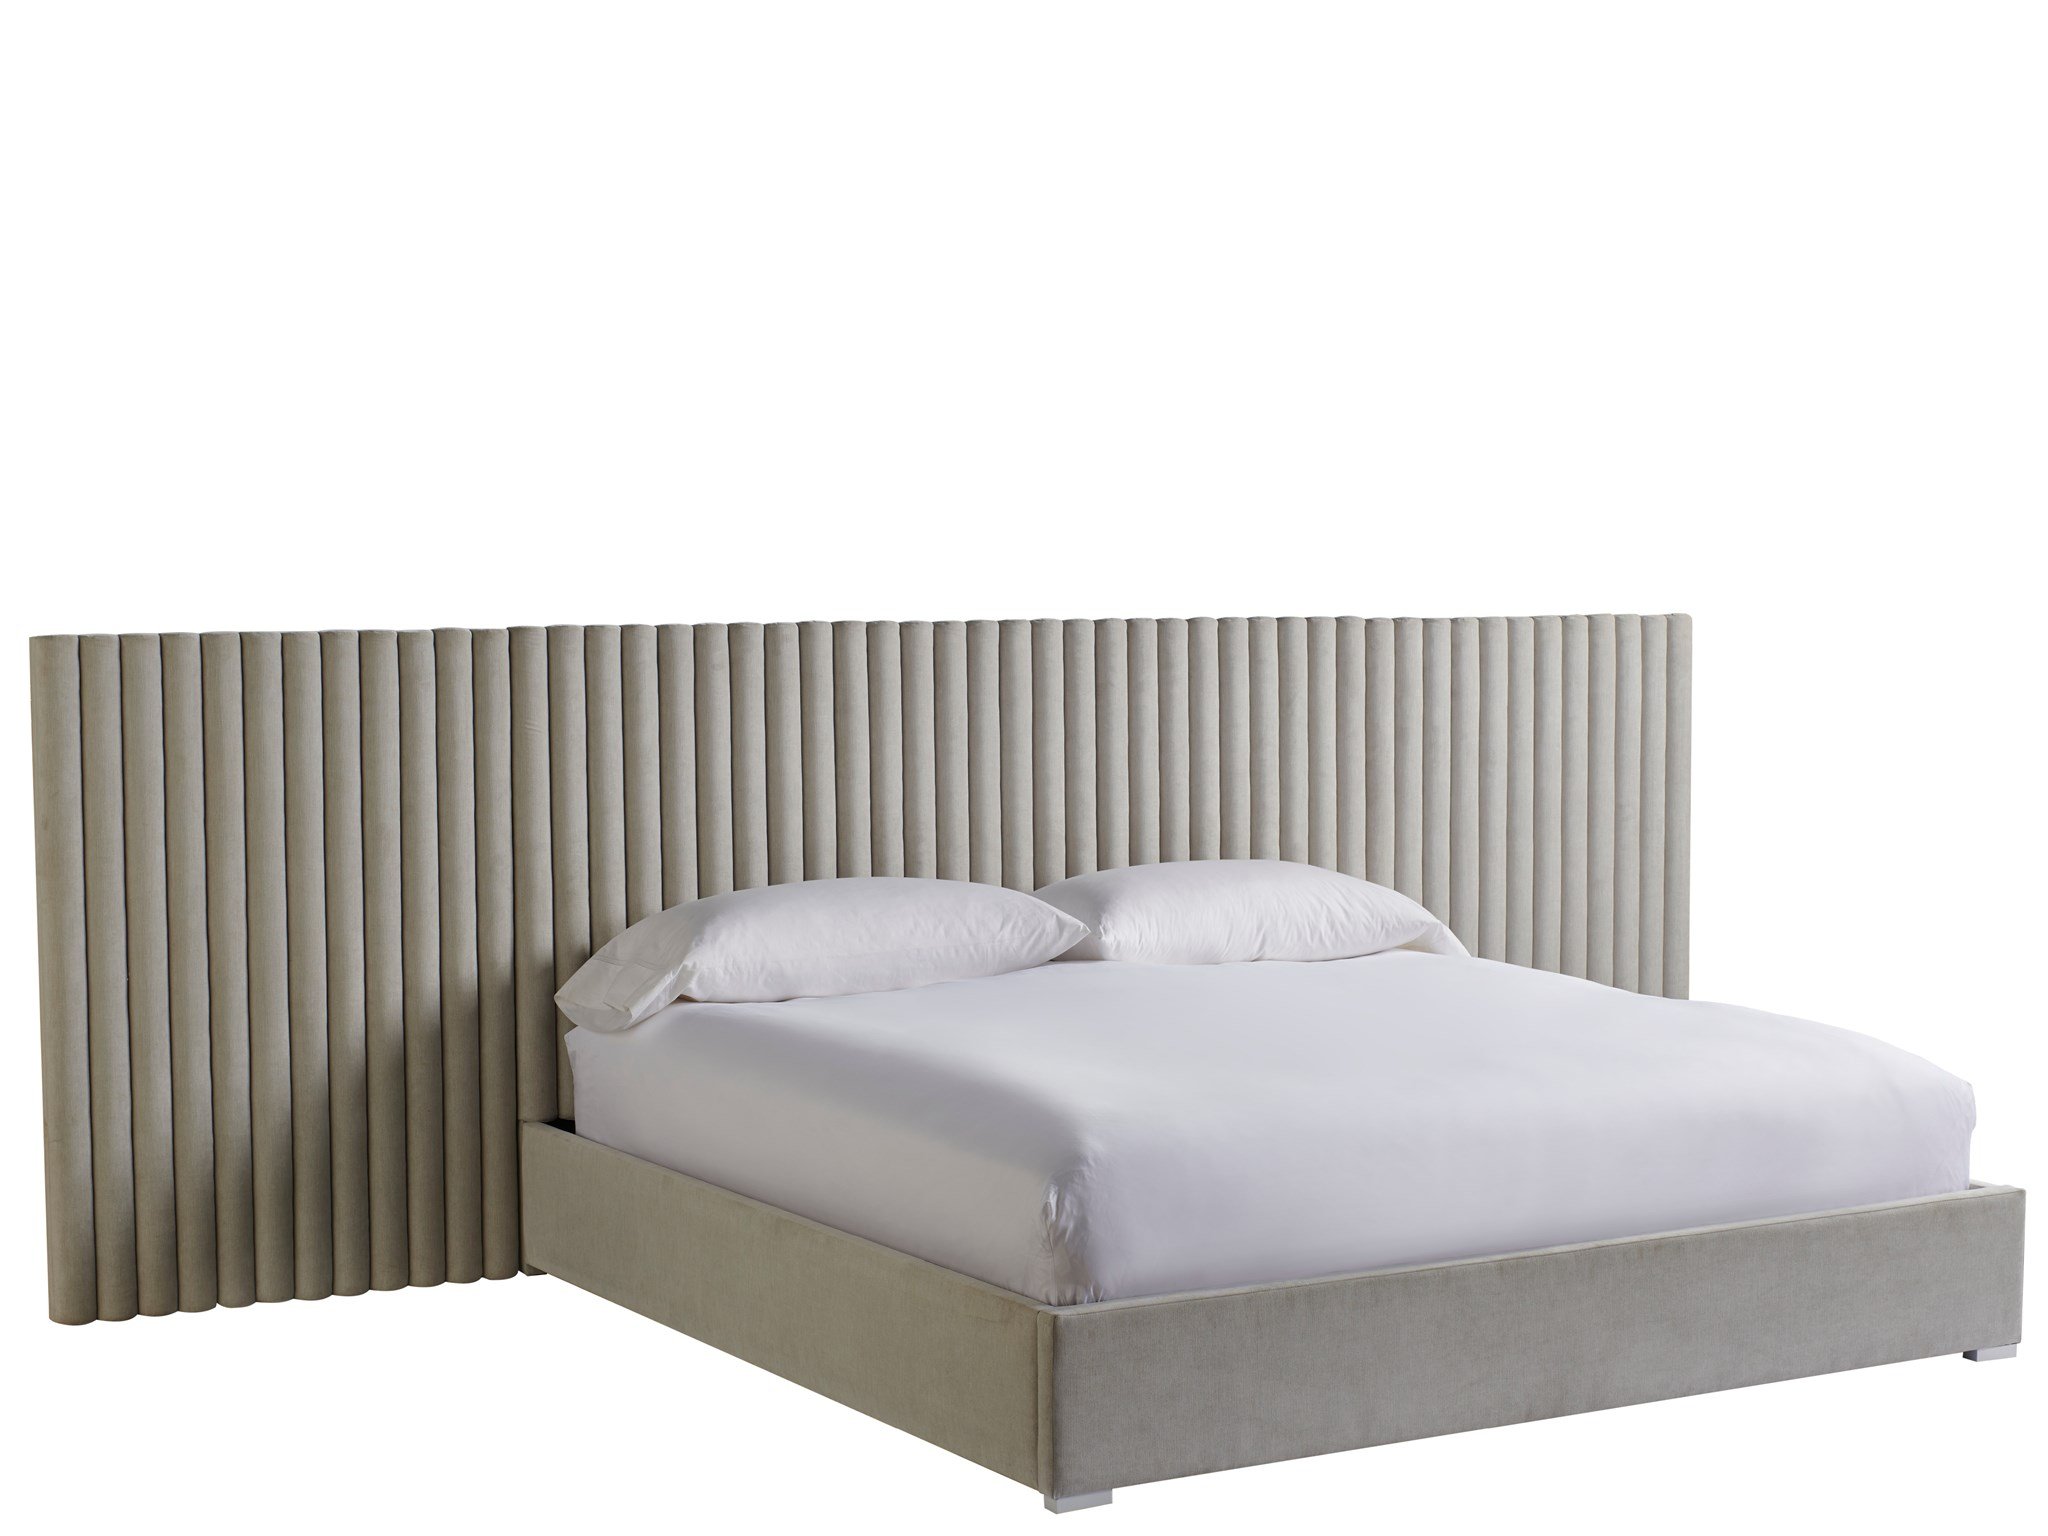 Decker Queen Wall Bed with Panels